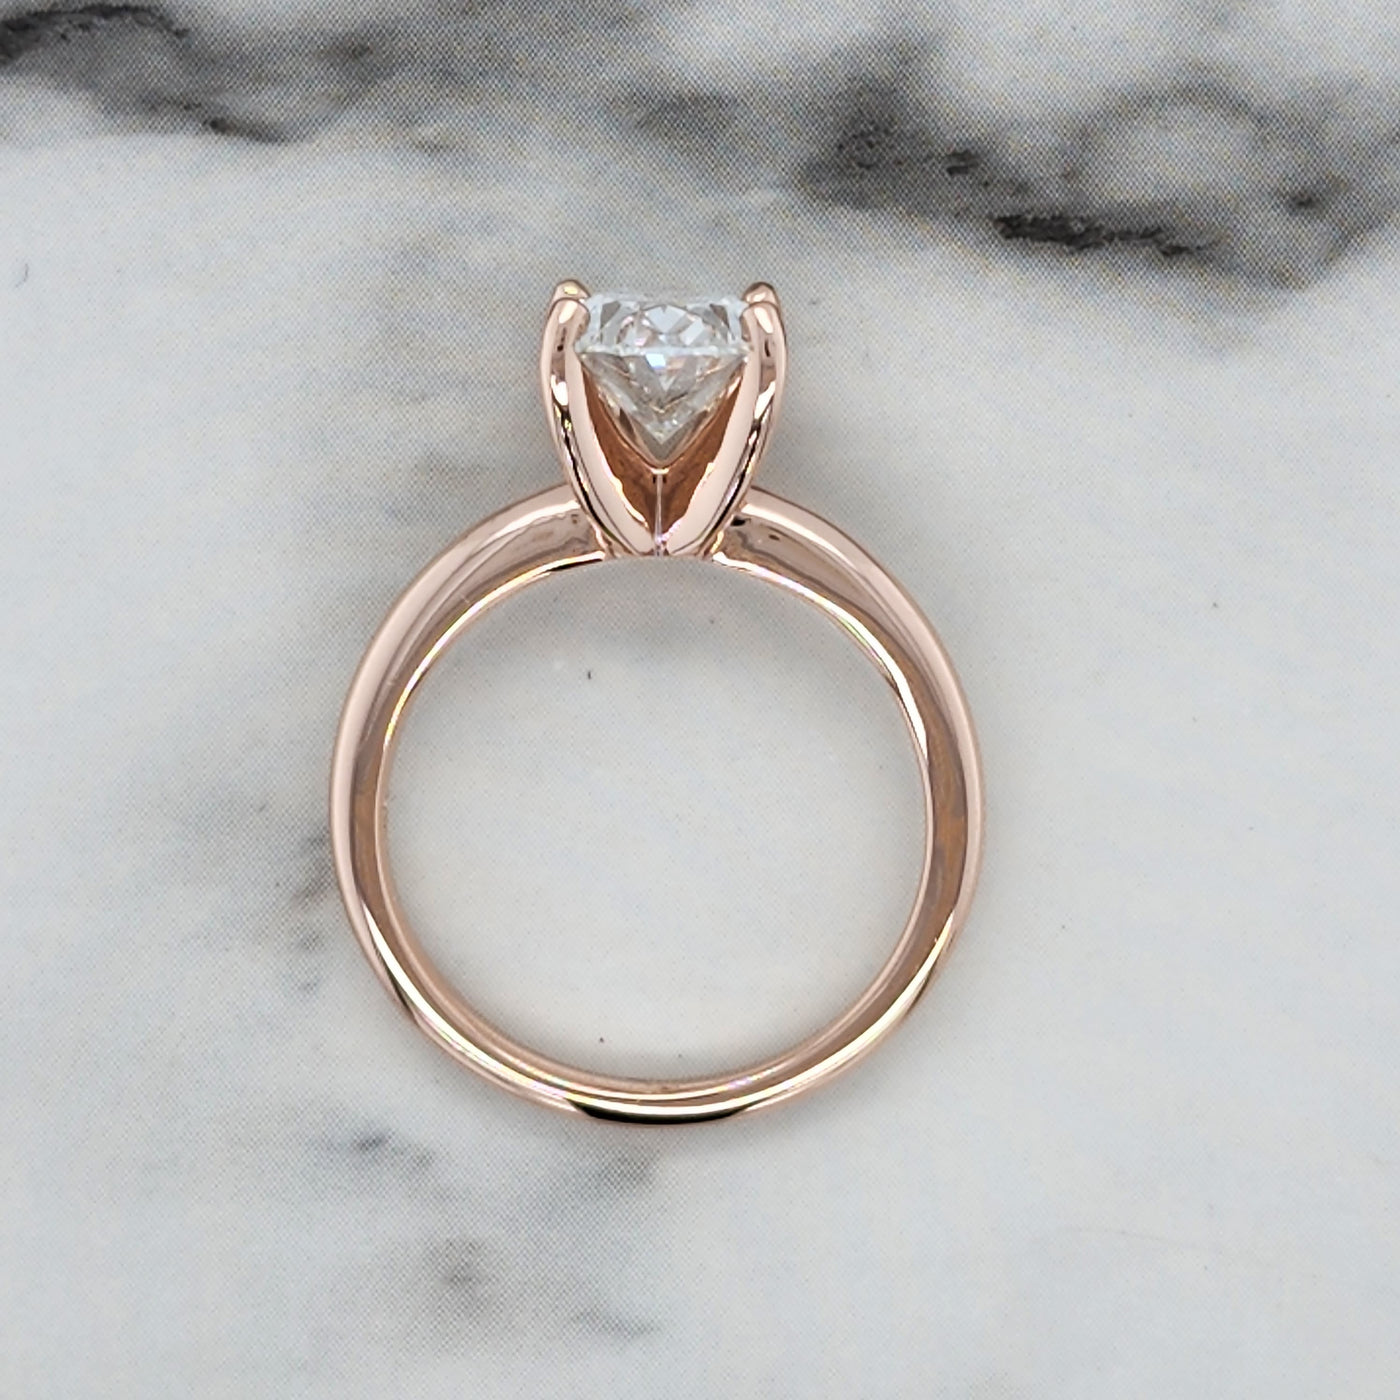 Rose Gold Solitaire Engagement Ring With Oval Center Diamond